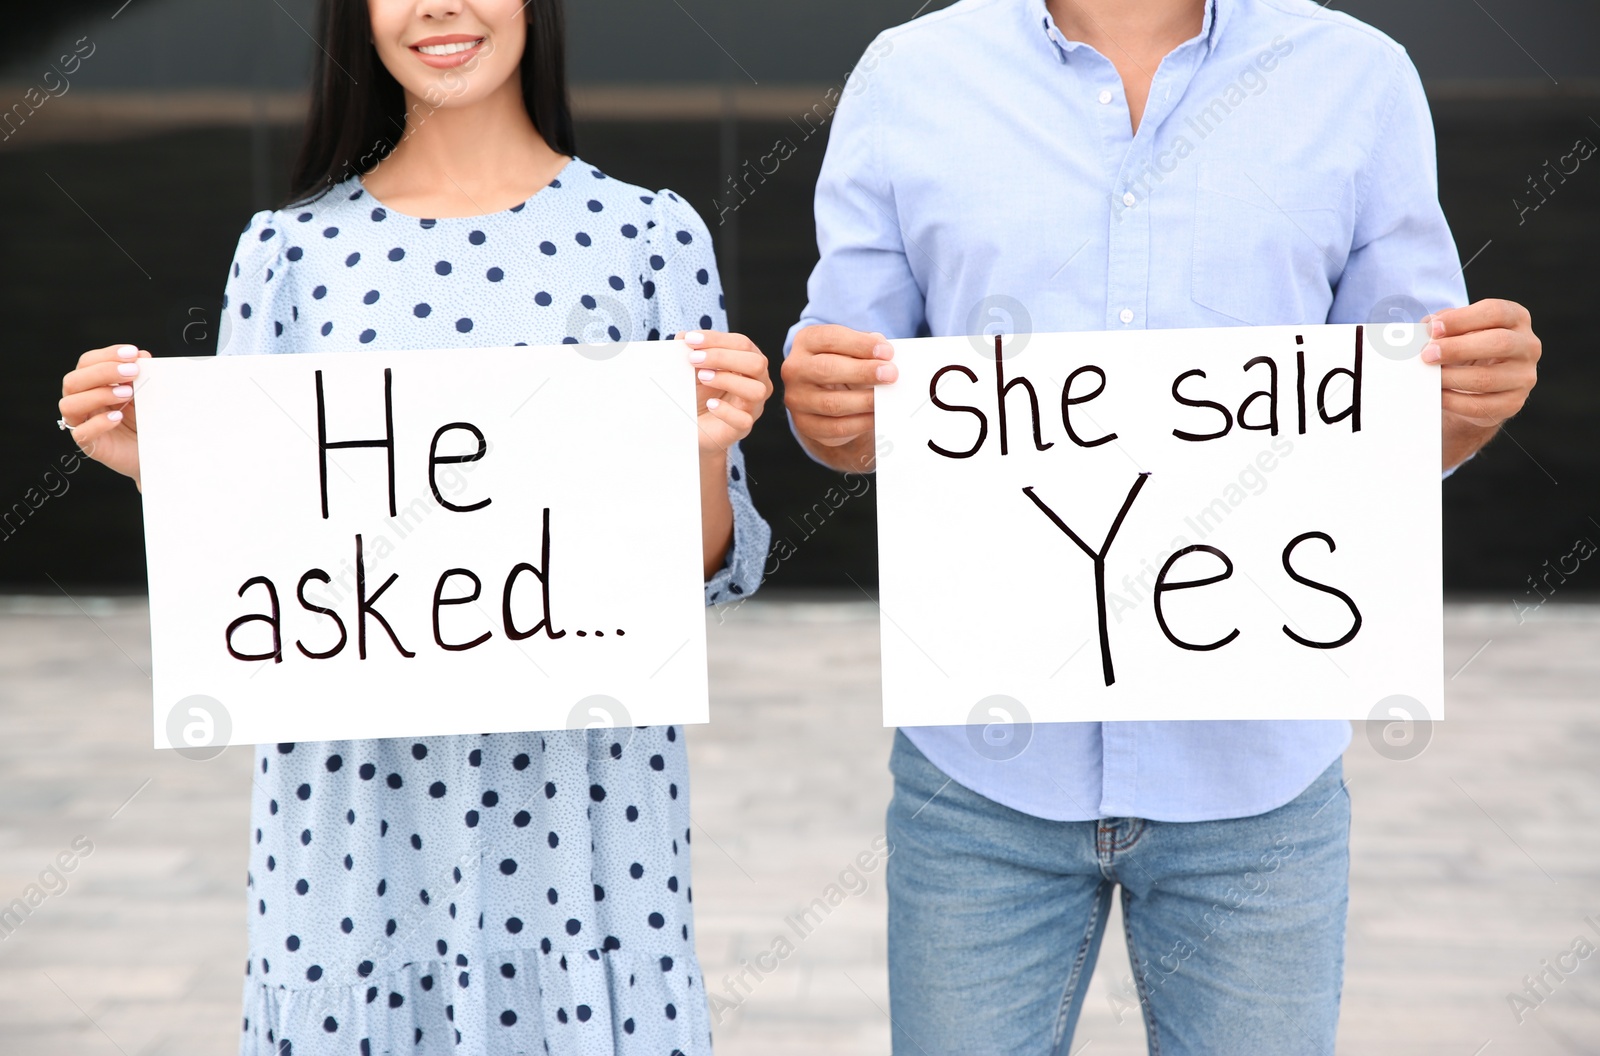 Photo of Lovely couple holding posters with text HE ASKED... SHE SAID YES after engagement outdoors, closeup